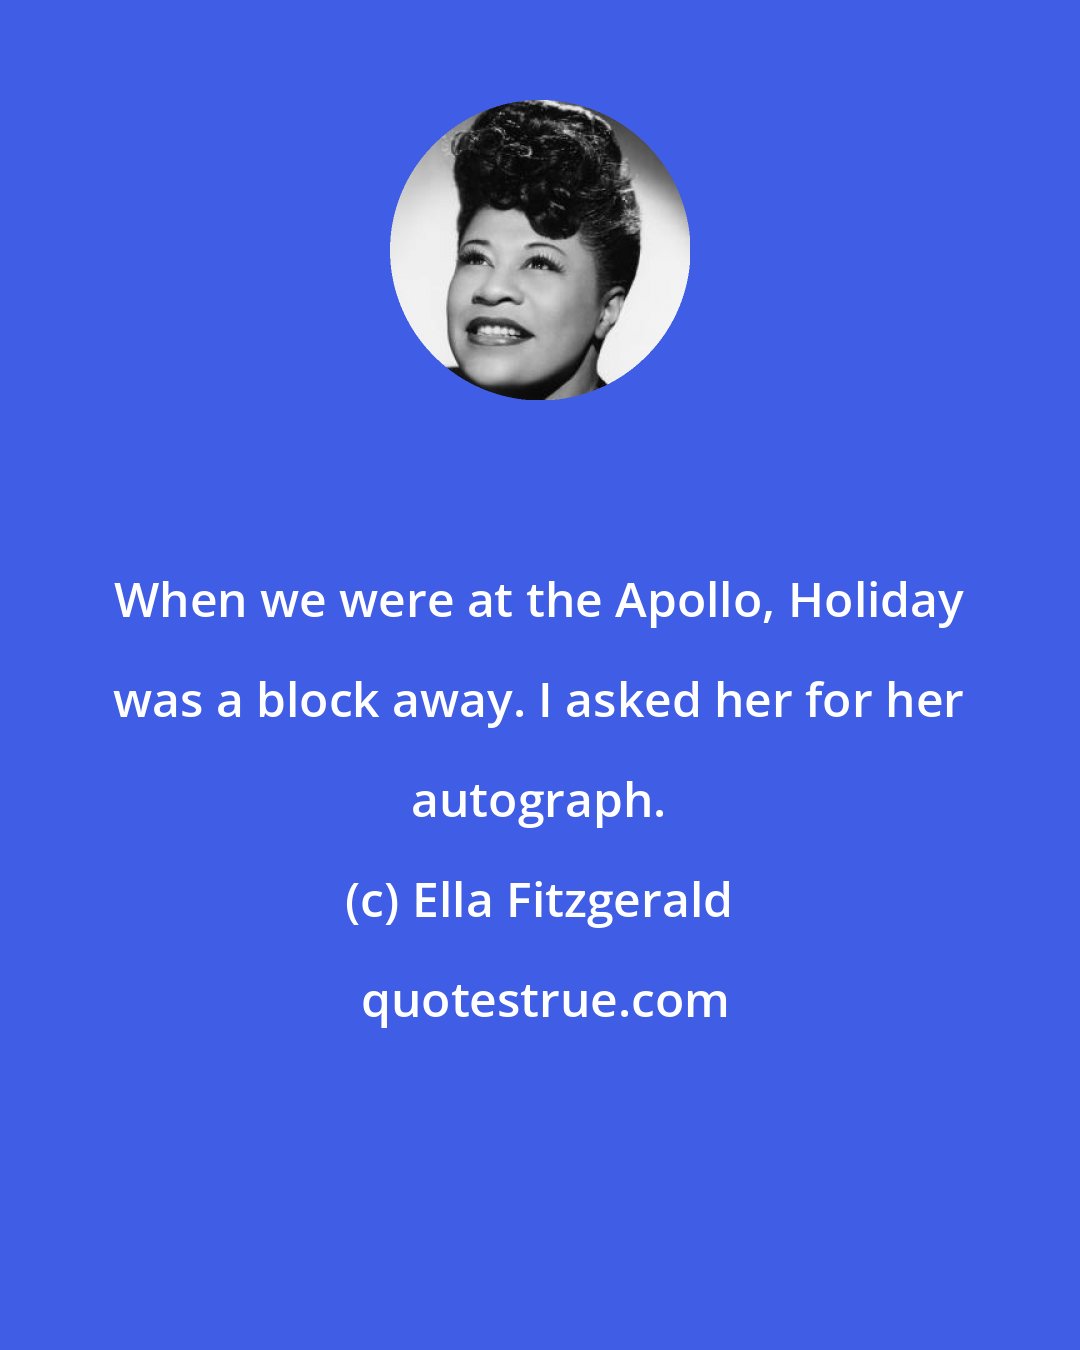 Ella Fitzgerald: When we were at the Apollo, Holiday was a block away. I asked her for her autograph.